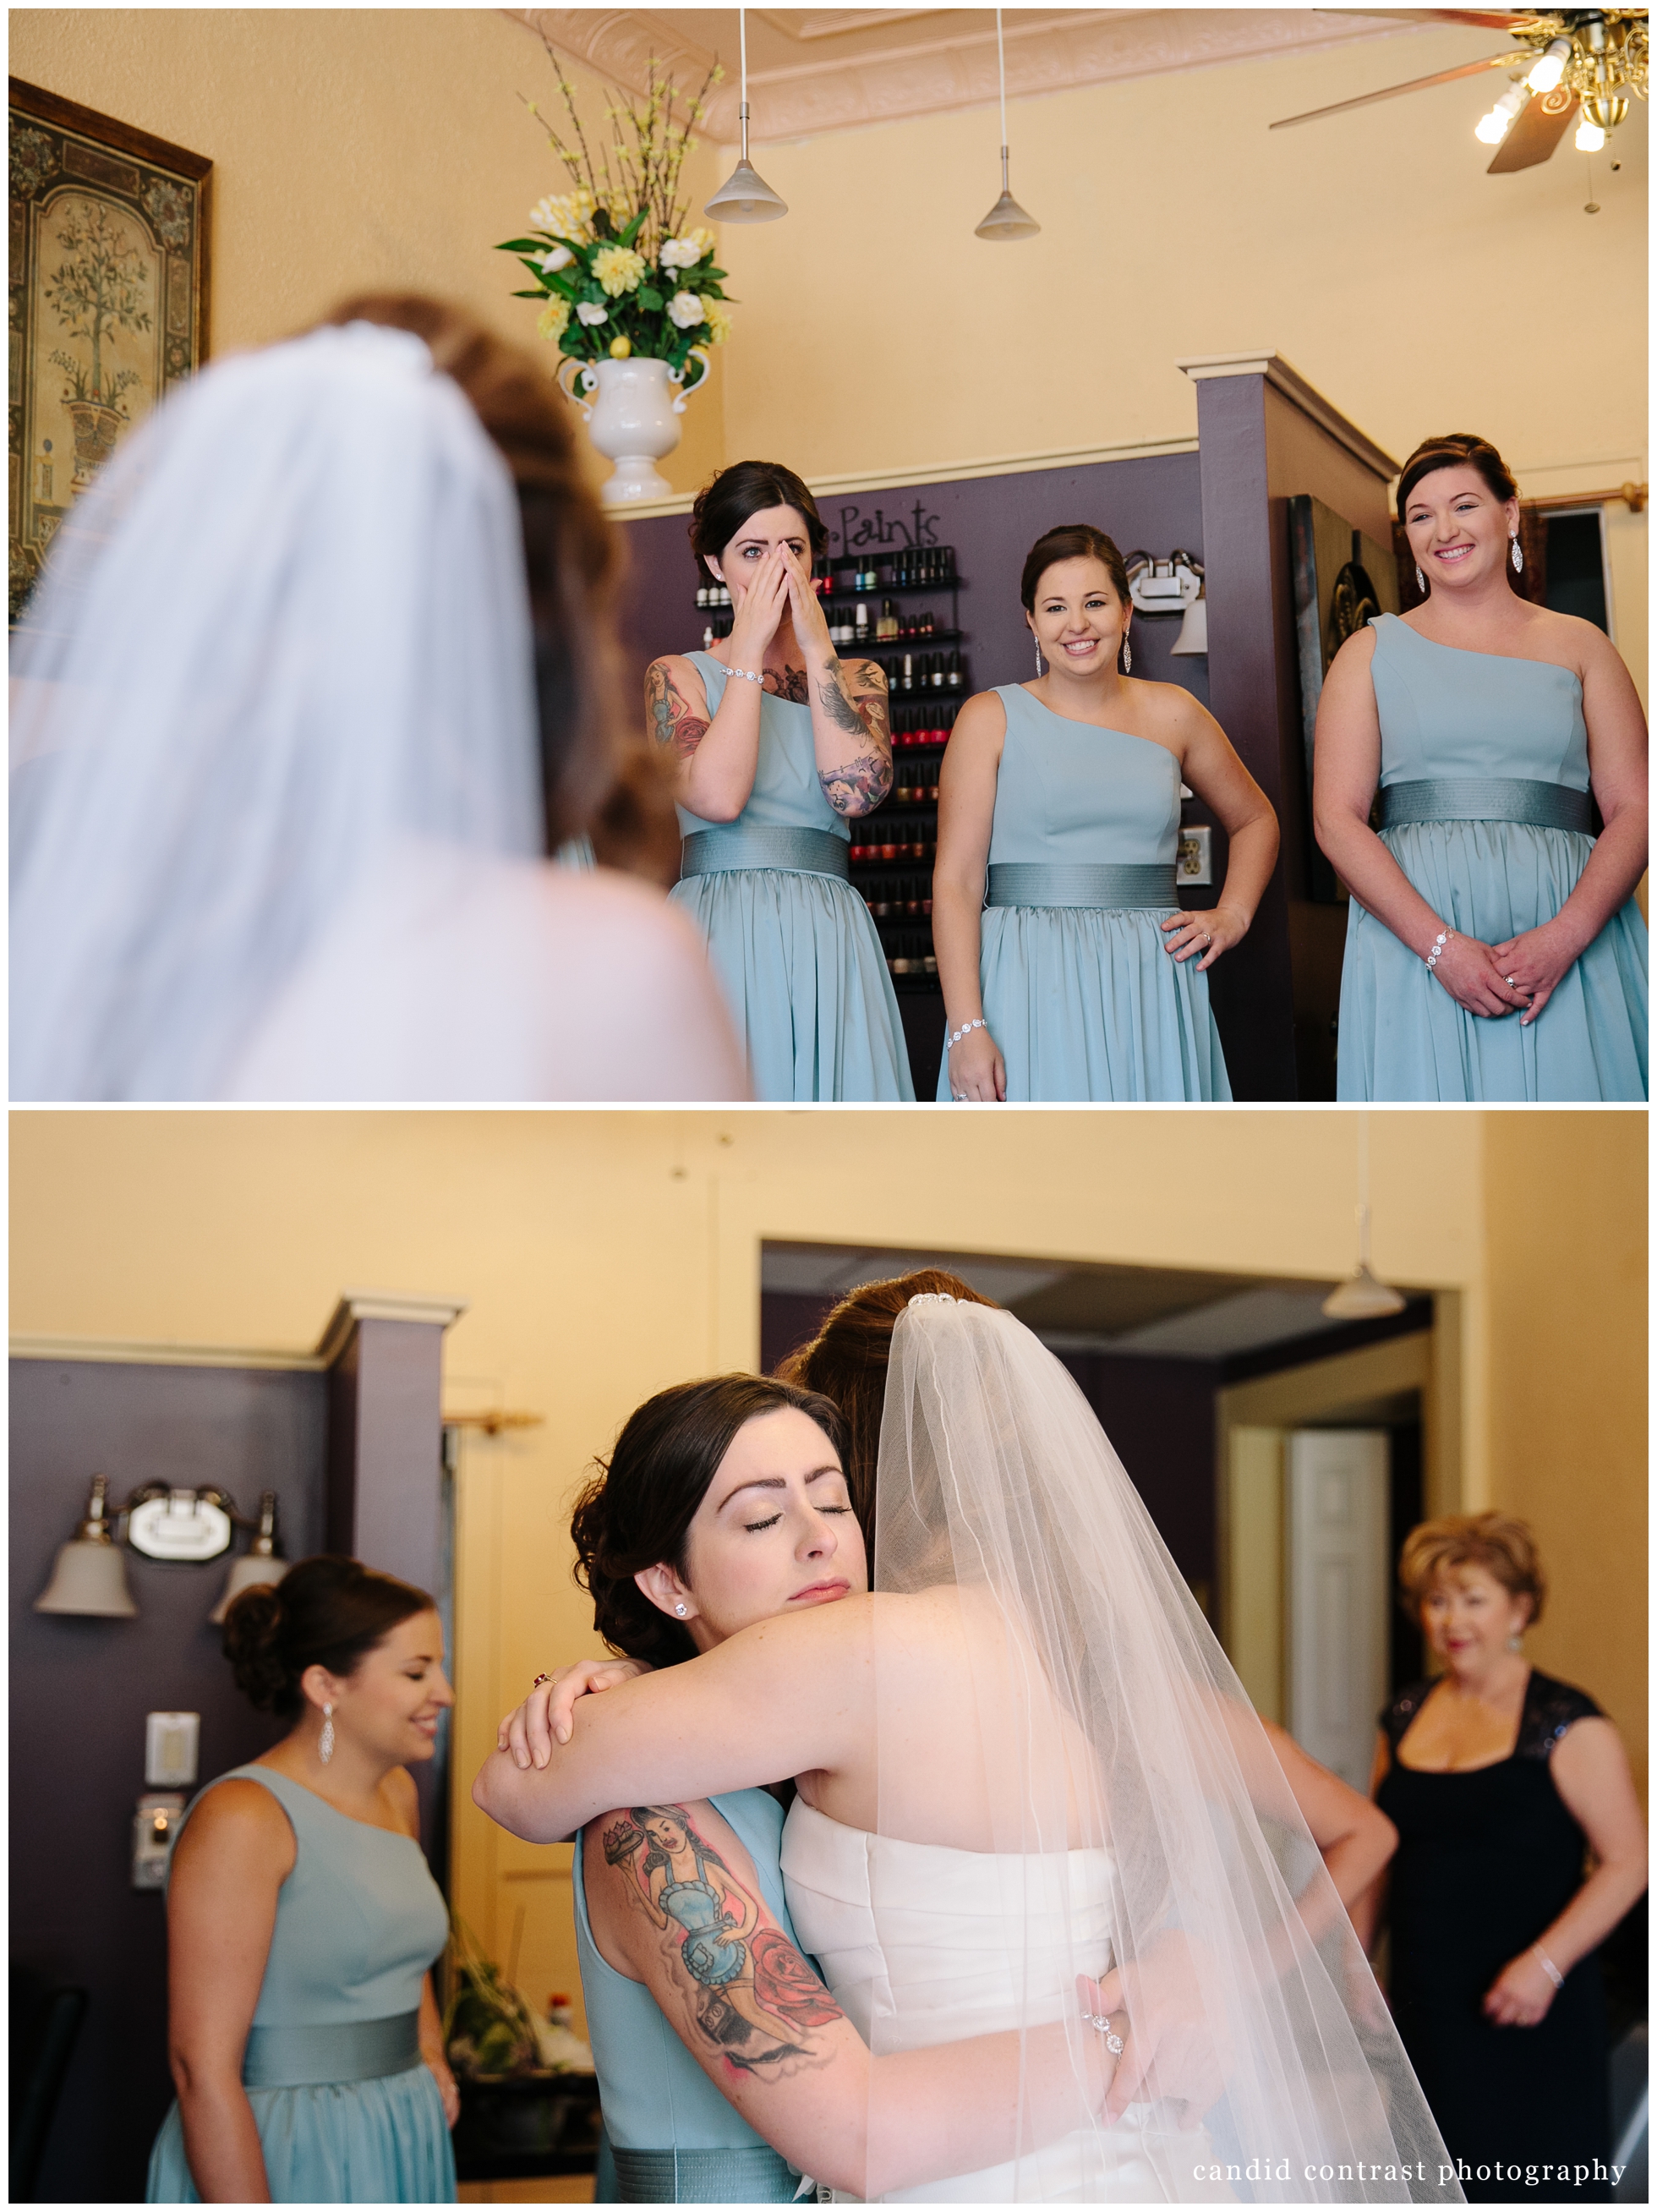 bride getting ready in indulgence salon and spa at dubuque, ia wedding, candid contrast photography